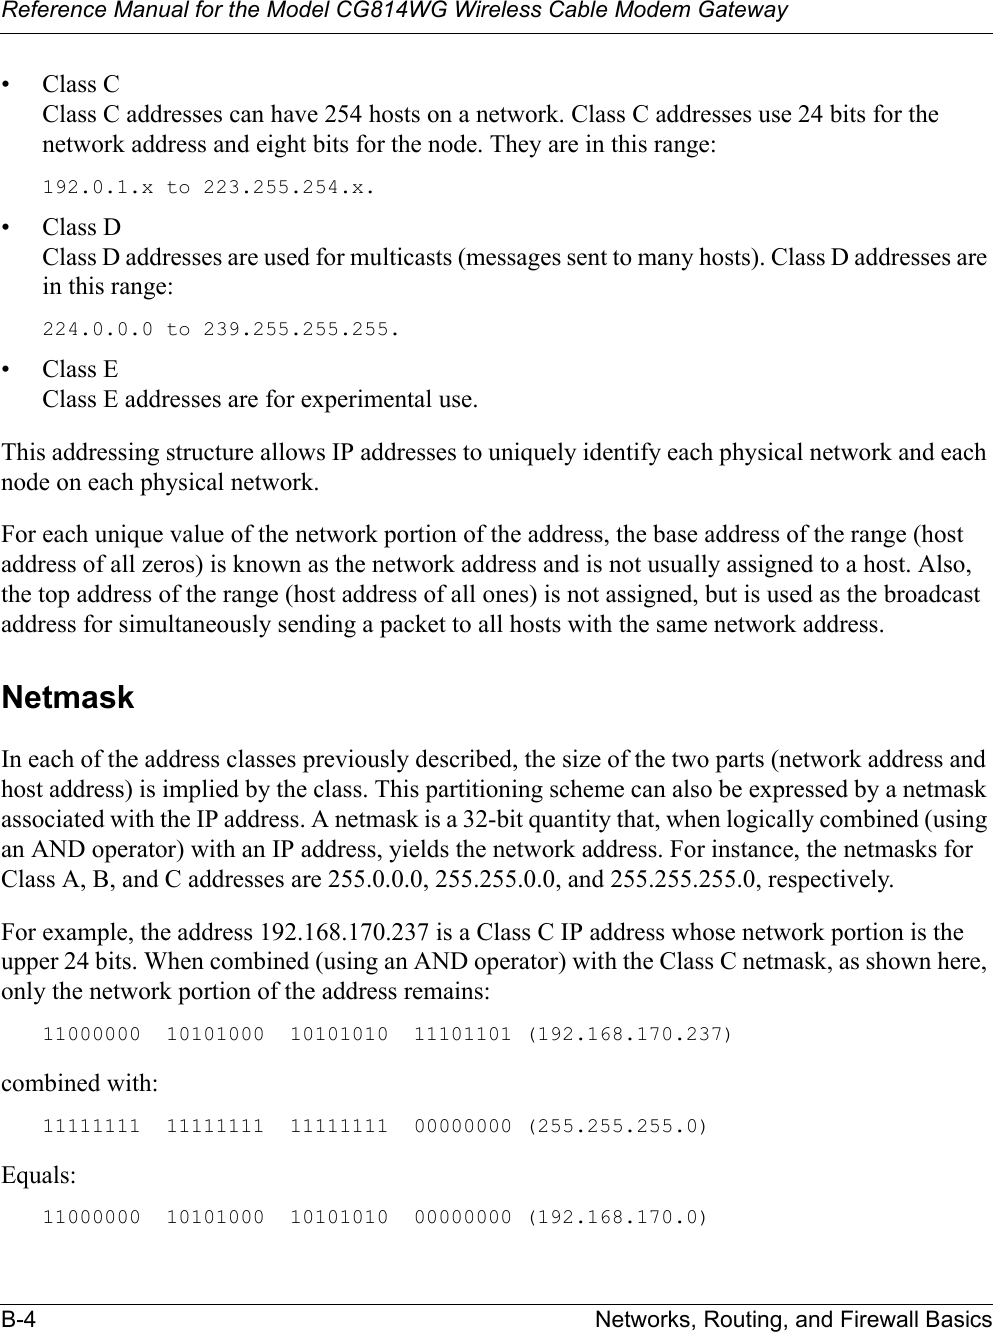 Reference Manual for the Model CG814WG Wireless Cable Modem GatewayB-4 Networks, Routing, and Firewall Basics•Class CClass C addresses can have 254 hosts on a network. Class C addresses use 24 bits for the network address and eight bits for the node. They are in this range:192.0.1.x to 223.255.254.x. •Class DClass D addresses are used for multicasts (messages sent to many hosts). Class D addresses are in this range:224.0.0.0 to 239.255.255.255. •Class EClass E addresses are for experimental use. This addressing structure allows IP addresses to uniquely identify each physical network and each node on each physical network.For each unique value of the network portion of the address, the base address of the range (host address of all zeros) is known as the network address and is not usually assigned to a host. Also, the top address of the range (host address of all ones) is not assigned, but is used as the broadcast address for simultaneously sending a packet to all hosts with the same network address.NetmaskIn each of the address classes previously described, the size of the two parts (network address and host address) is implied by the class. This partitioning scheme can also be expressed by a netmask associated with the IP address. A netmask is a 32-bit quantity that, when logically combined (using an AND operator) with an IP address, yields the network address. For instance, the netmasks for Class A, B, and C addresses are 255.0.0.0, 255.255.0.0, and 255.255.255.0, respectively.For example, the address 192.168.170.237 is a Class C IP address whose network portion is the upper 24 bits. When combined (using an AND operator) with the Class C netmask, as shown here, only the network portion of the address remains:11000000  10101000  10101010  11101101 (192.168.170.237)combined with:11111111  11111111  11111111  00000000 (255.255.255.0)Equals:11000000  10101000  10101010  00000000 (192.168.170.0)